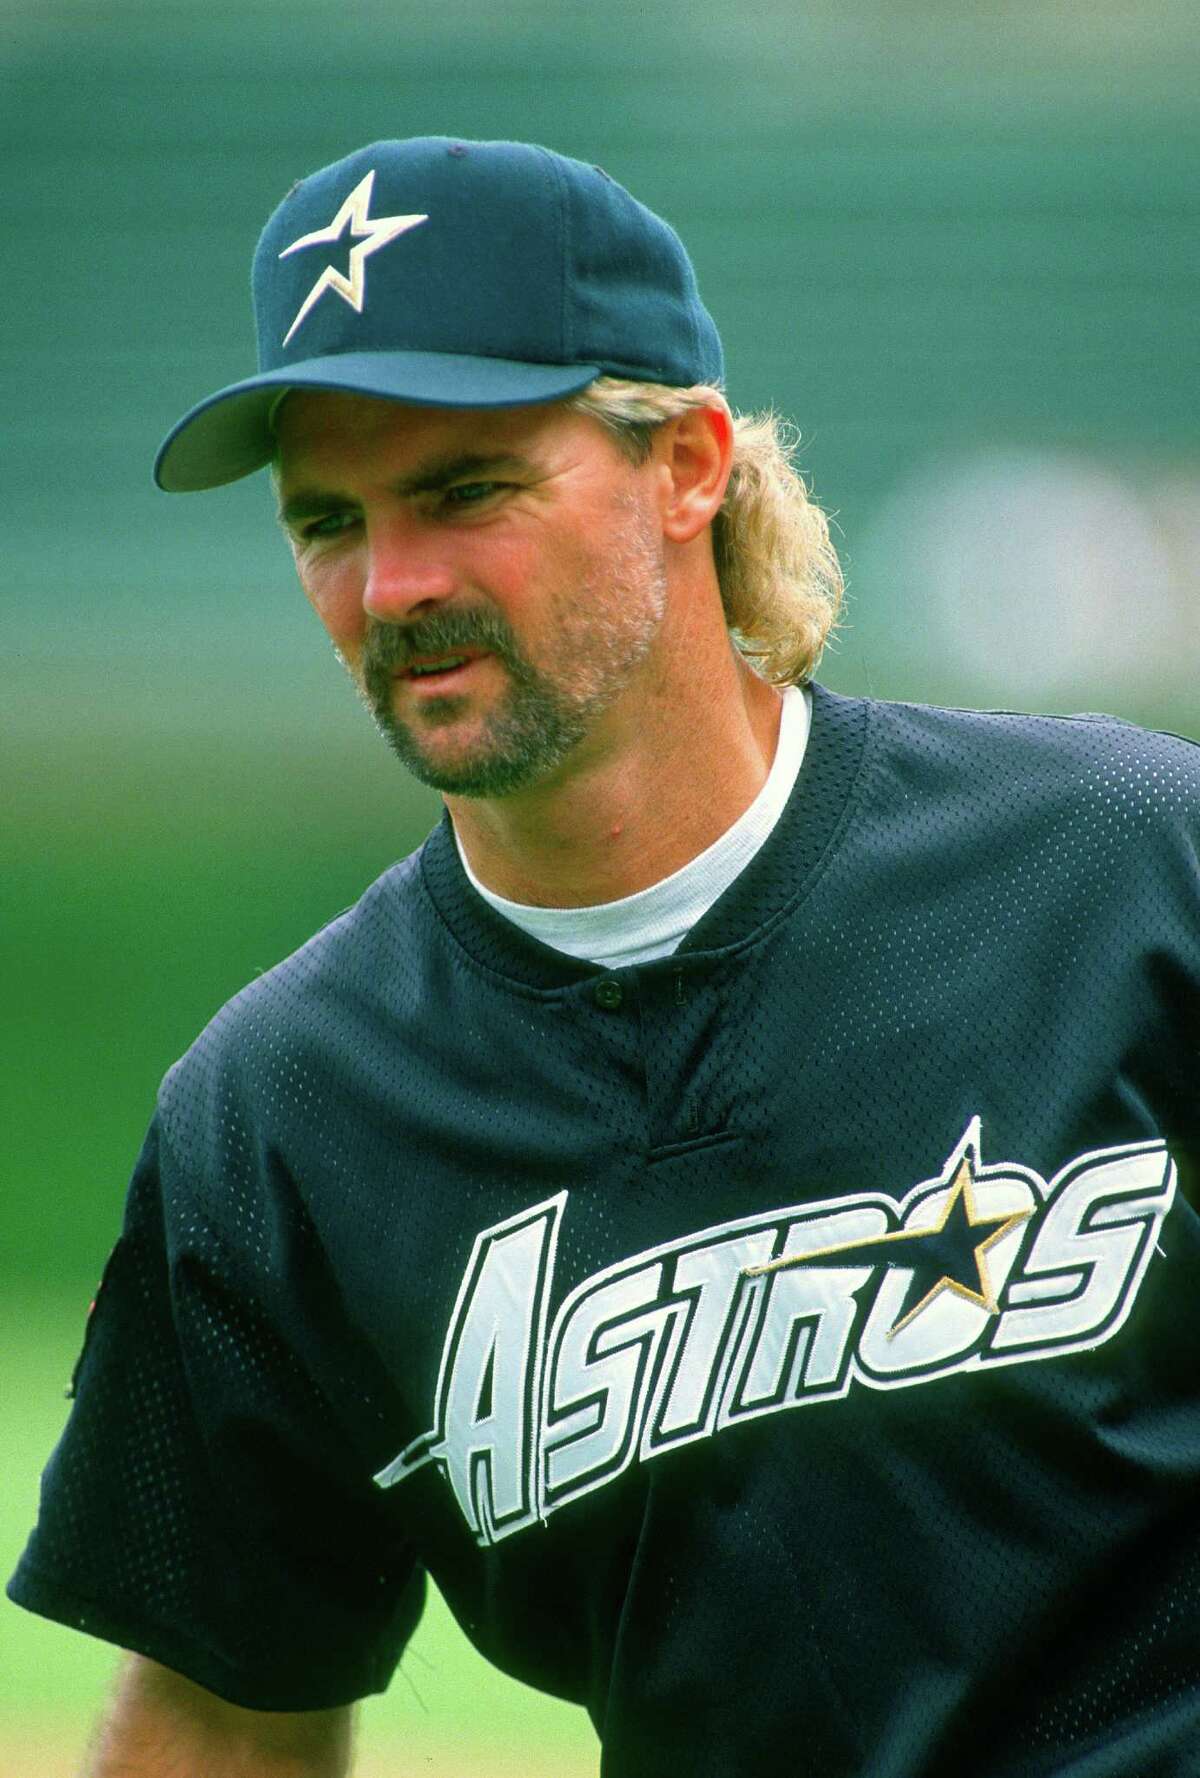 Doug Drabek, 1993-96 One of Drayton McLane's first big signings as owner, the former Cy Young winner in Pittsburgh didn't flash the same form in Houston, going 38-42 with a 4.00 ERA in four seasons with the Astros. He topped out at 12 wins in Houston.